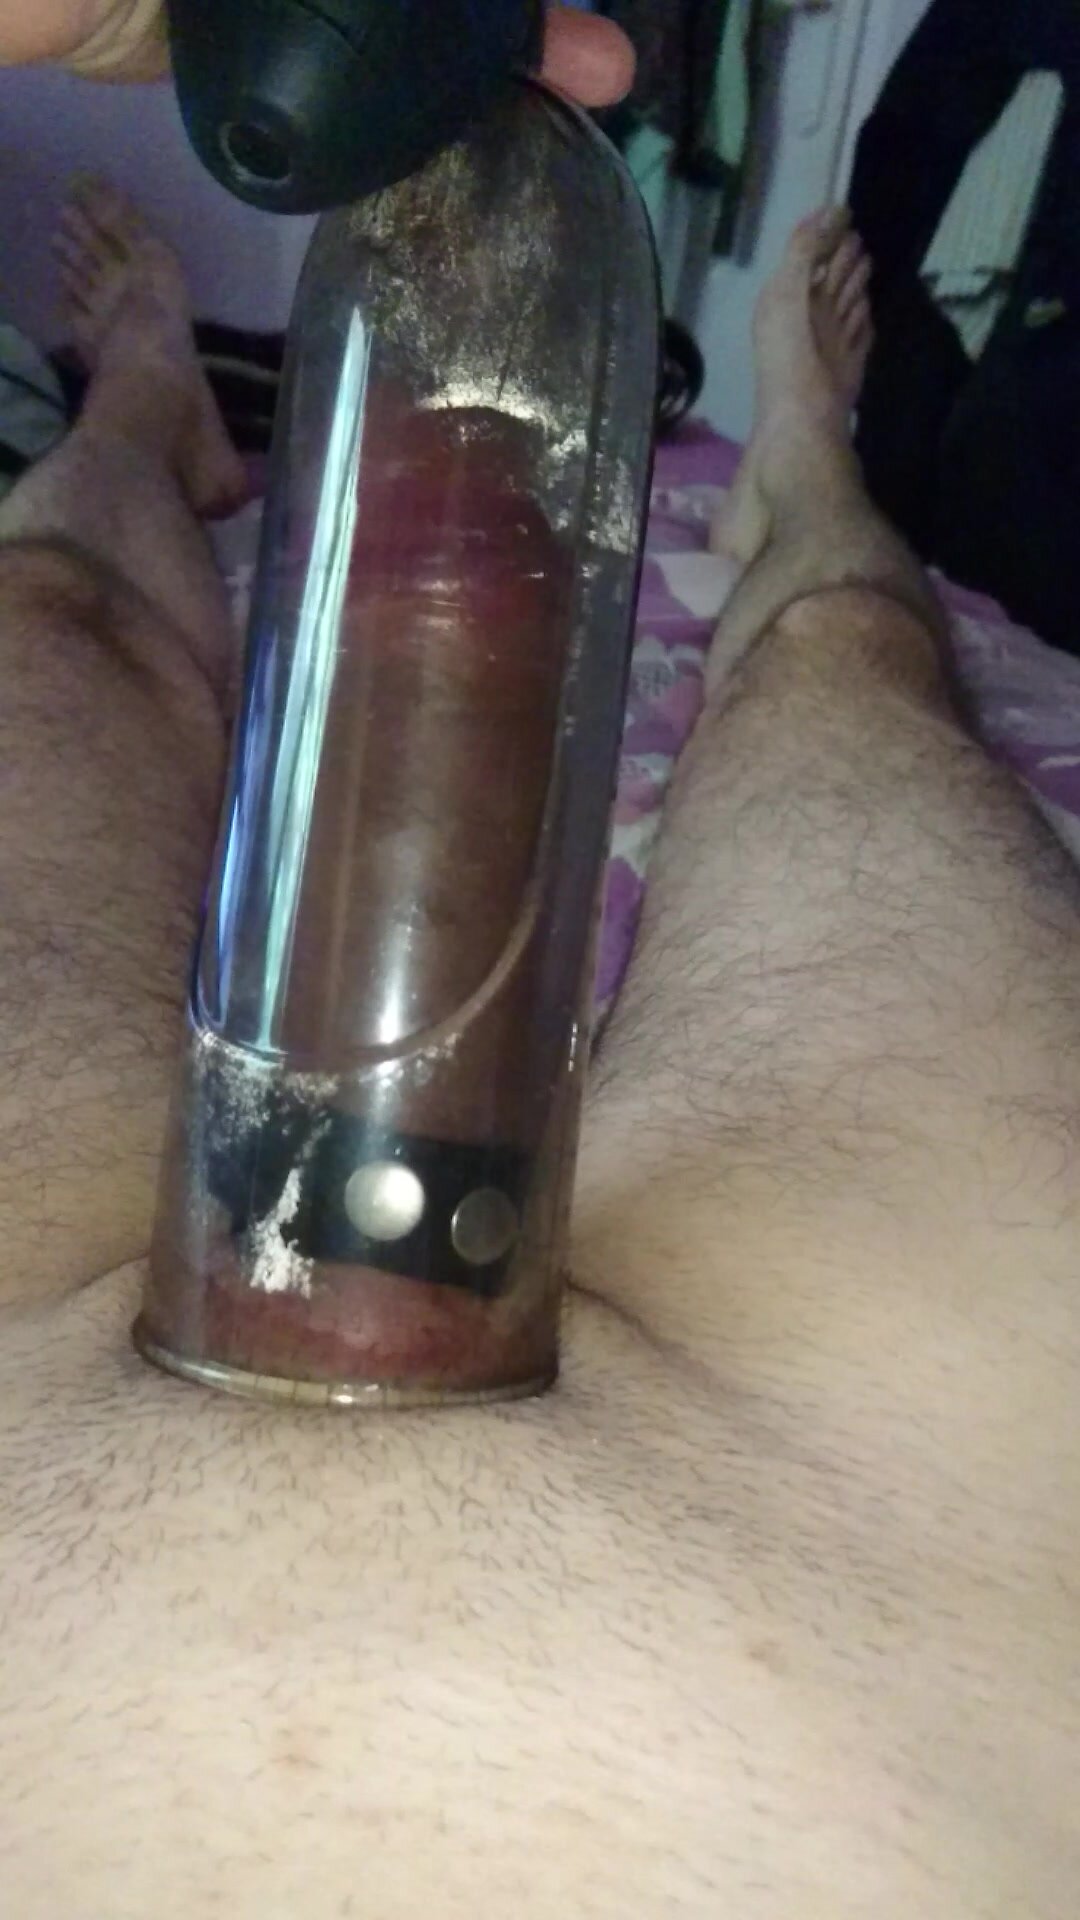 1st try at pumping my cock